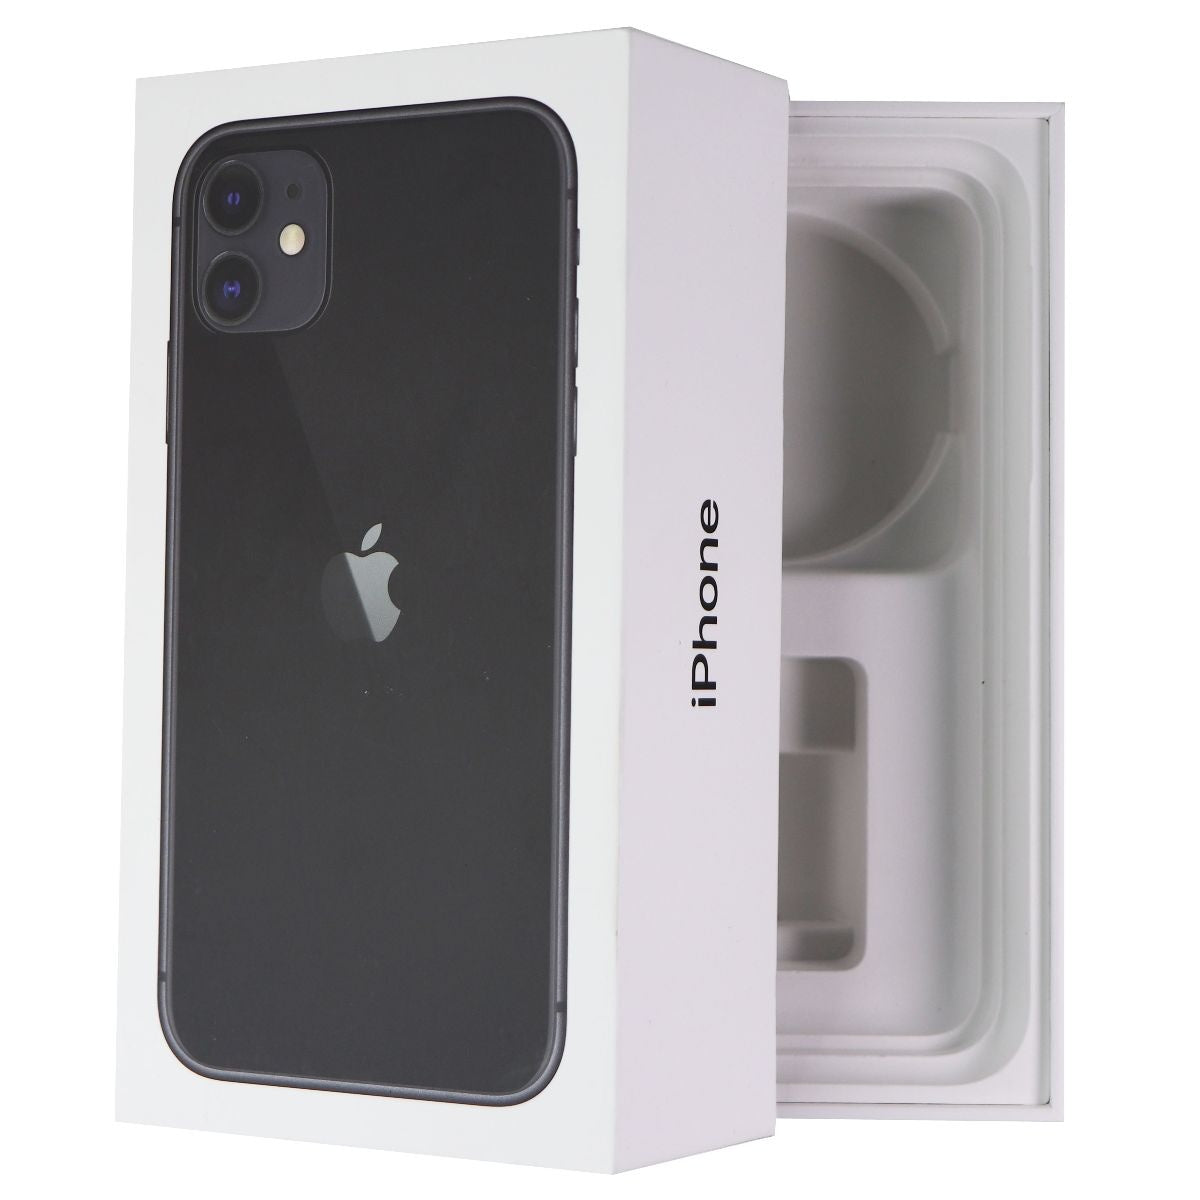 Apple iPhone 11 RETAIL BOX - 256GB / Black - NO DEVICE - Empty Box Cell Phone - Other Accessories Apple    - Simple Cell Bulk Wholesale Pricing - USA Seller